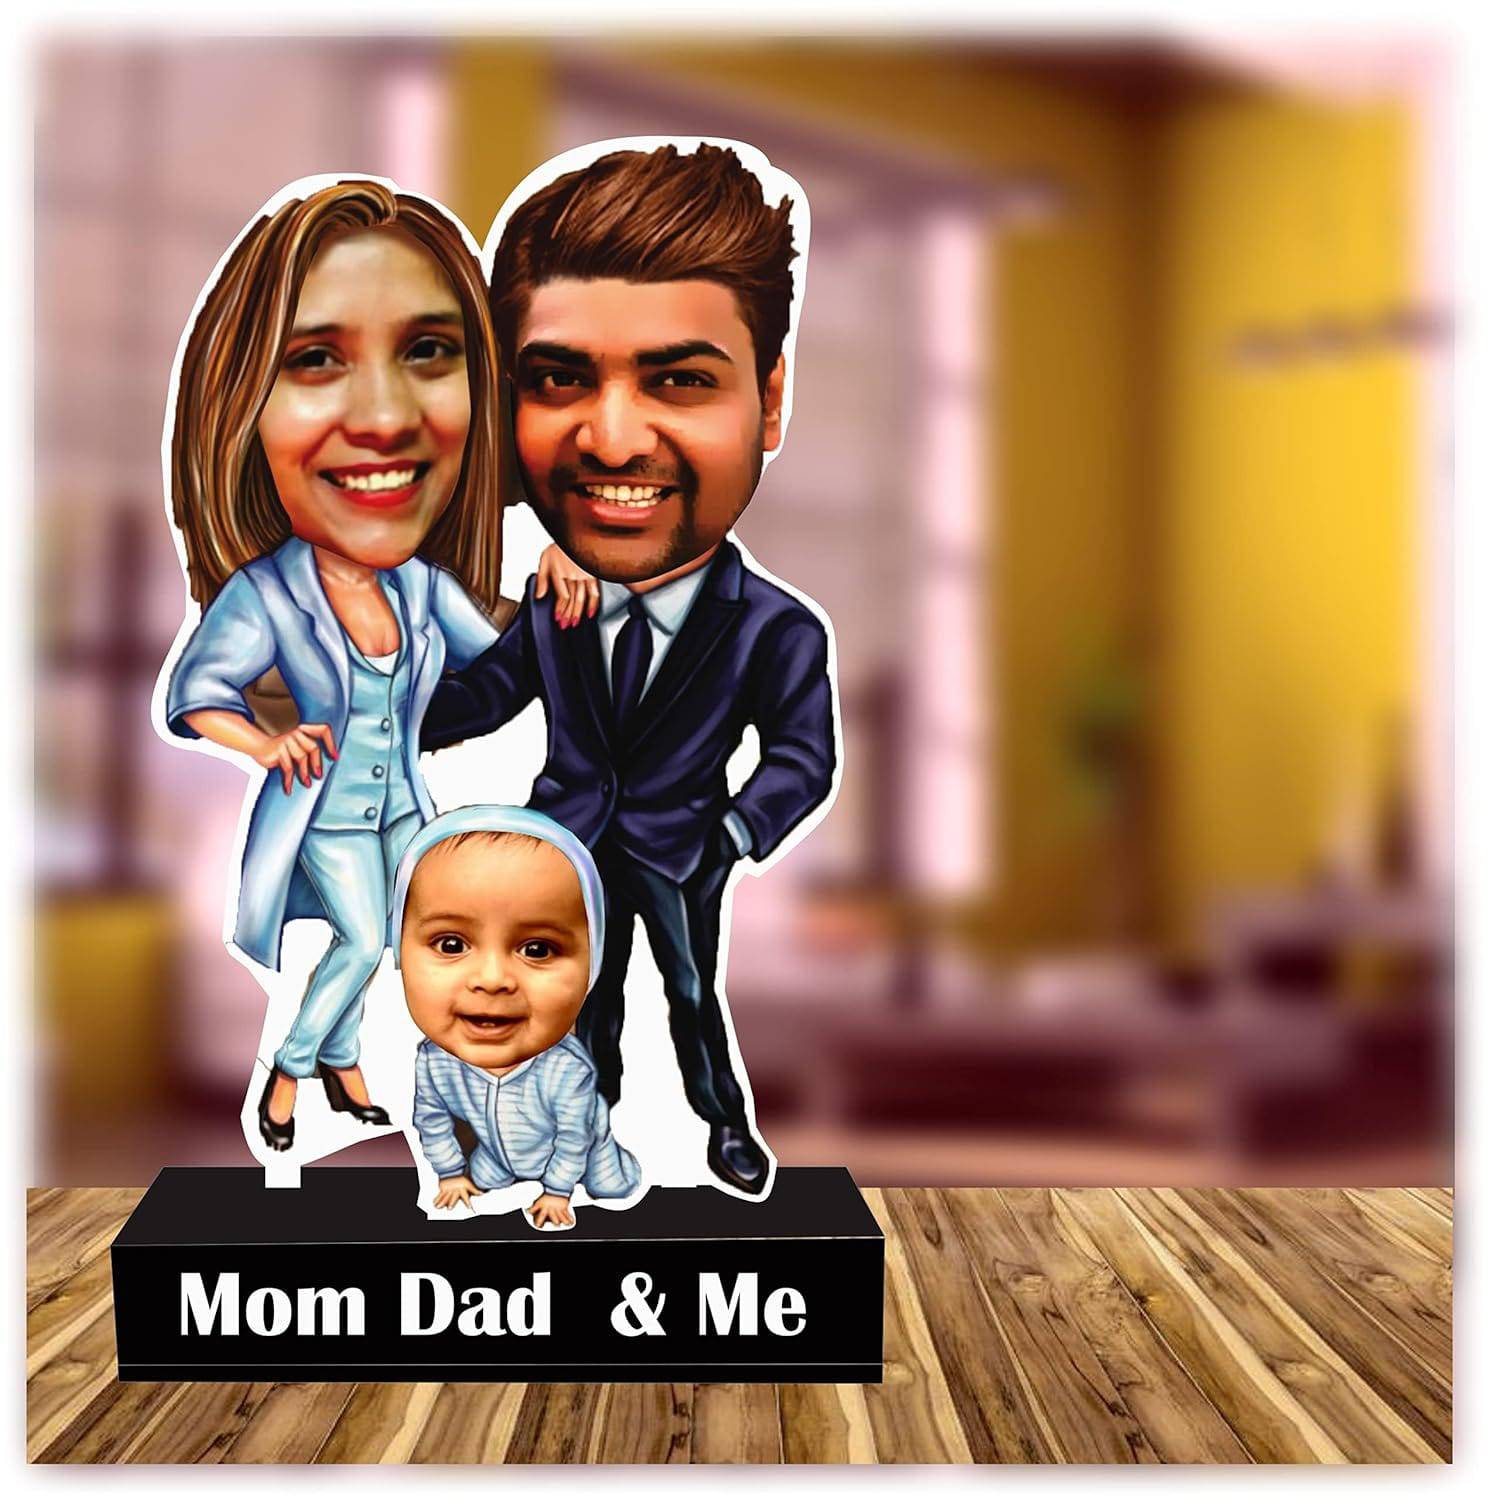 Personalized Gifts for Pregnant Wife/Women - Baby Shower Gift for Expecting Mom | Caricature Couple Standee with Cutout with Customised Captions (mom dad & me) - YuvaFlowers